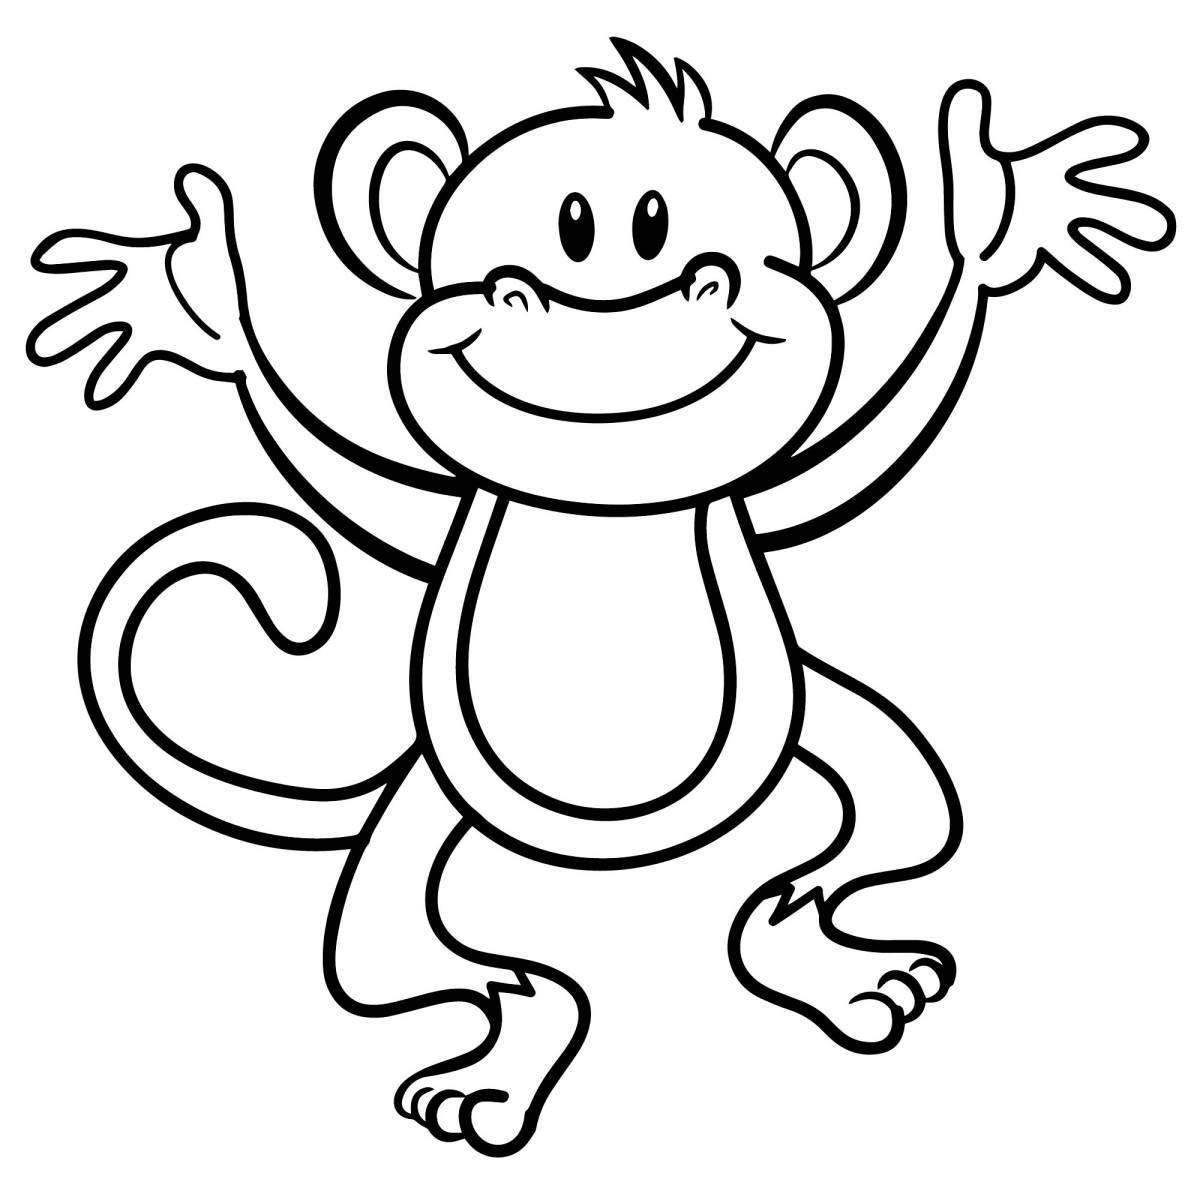 Excited monkey coloring book